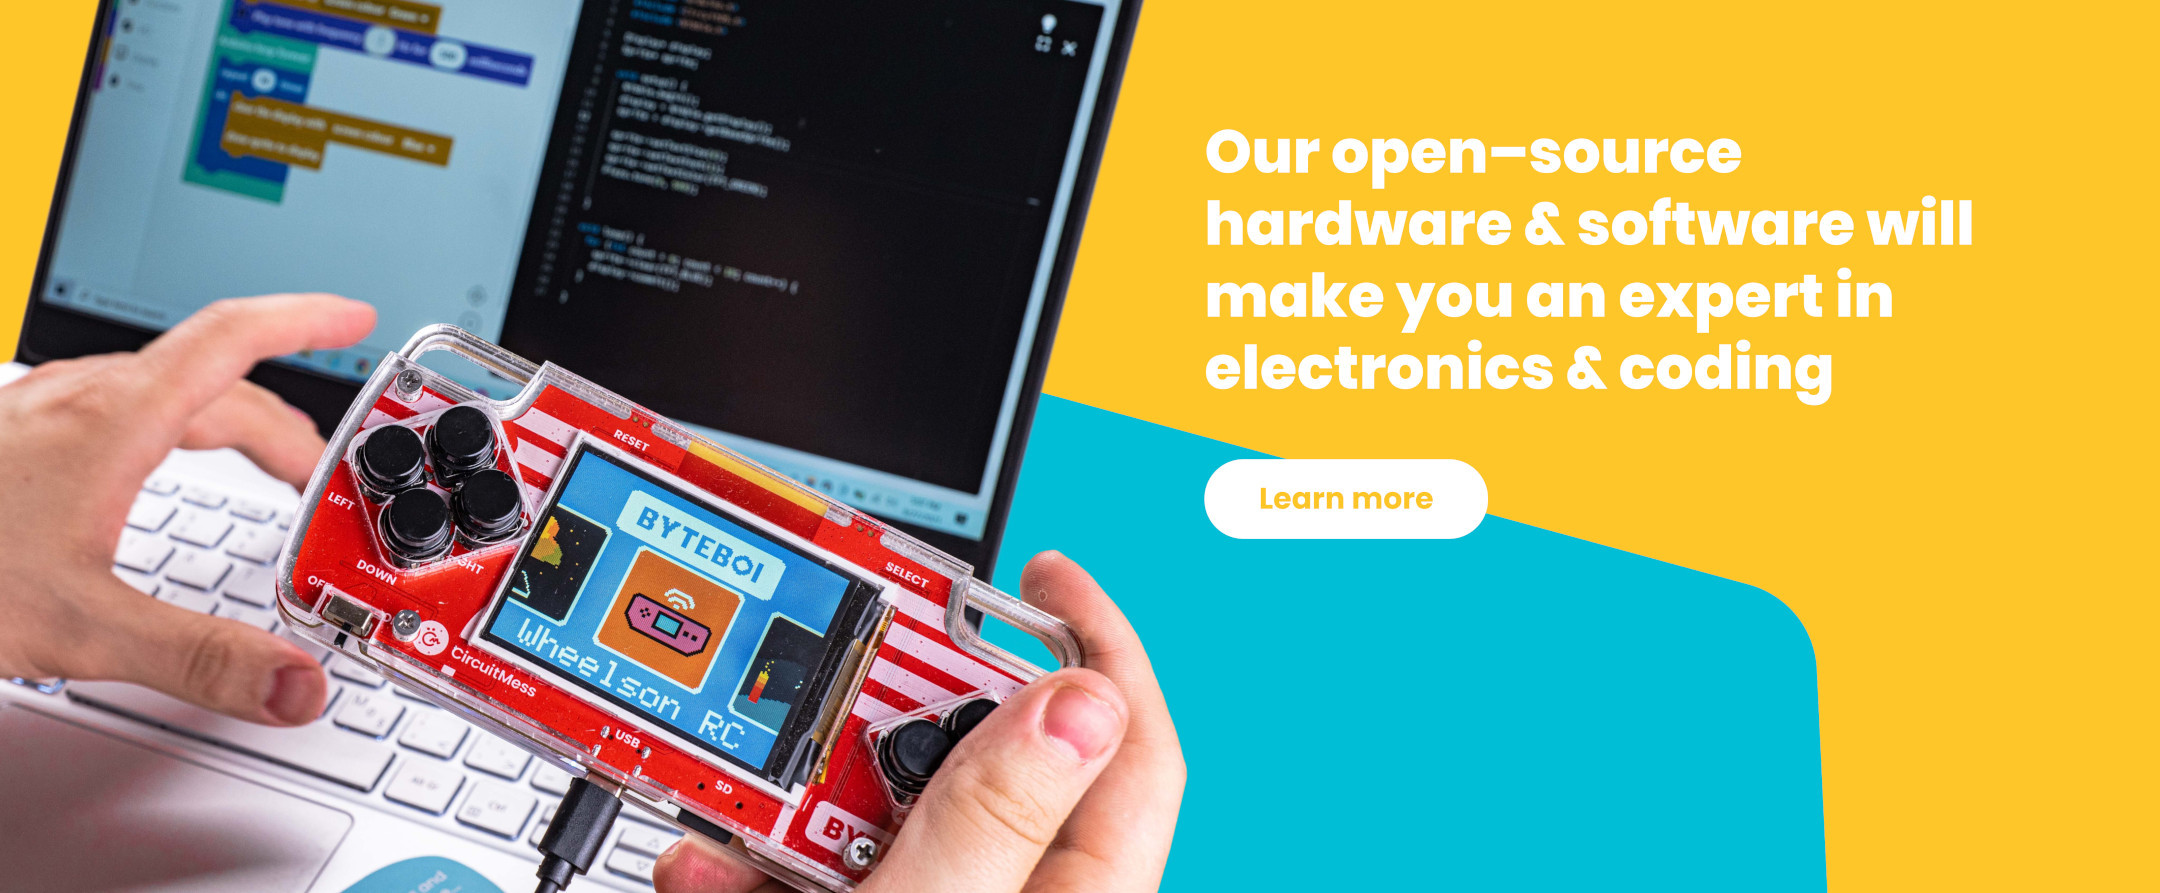 Fullwidth section: Our ope-source hardware & software will make you an expert in electronics& coding